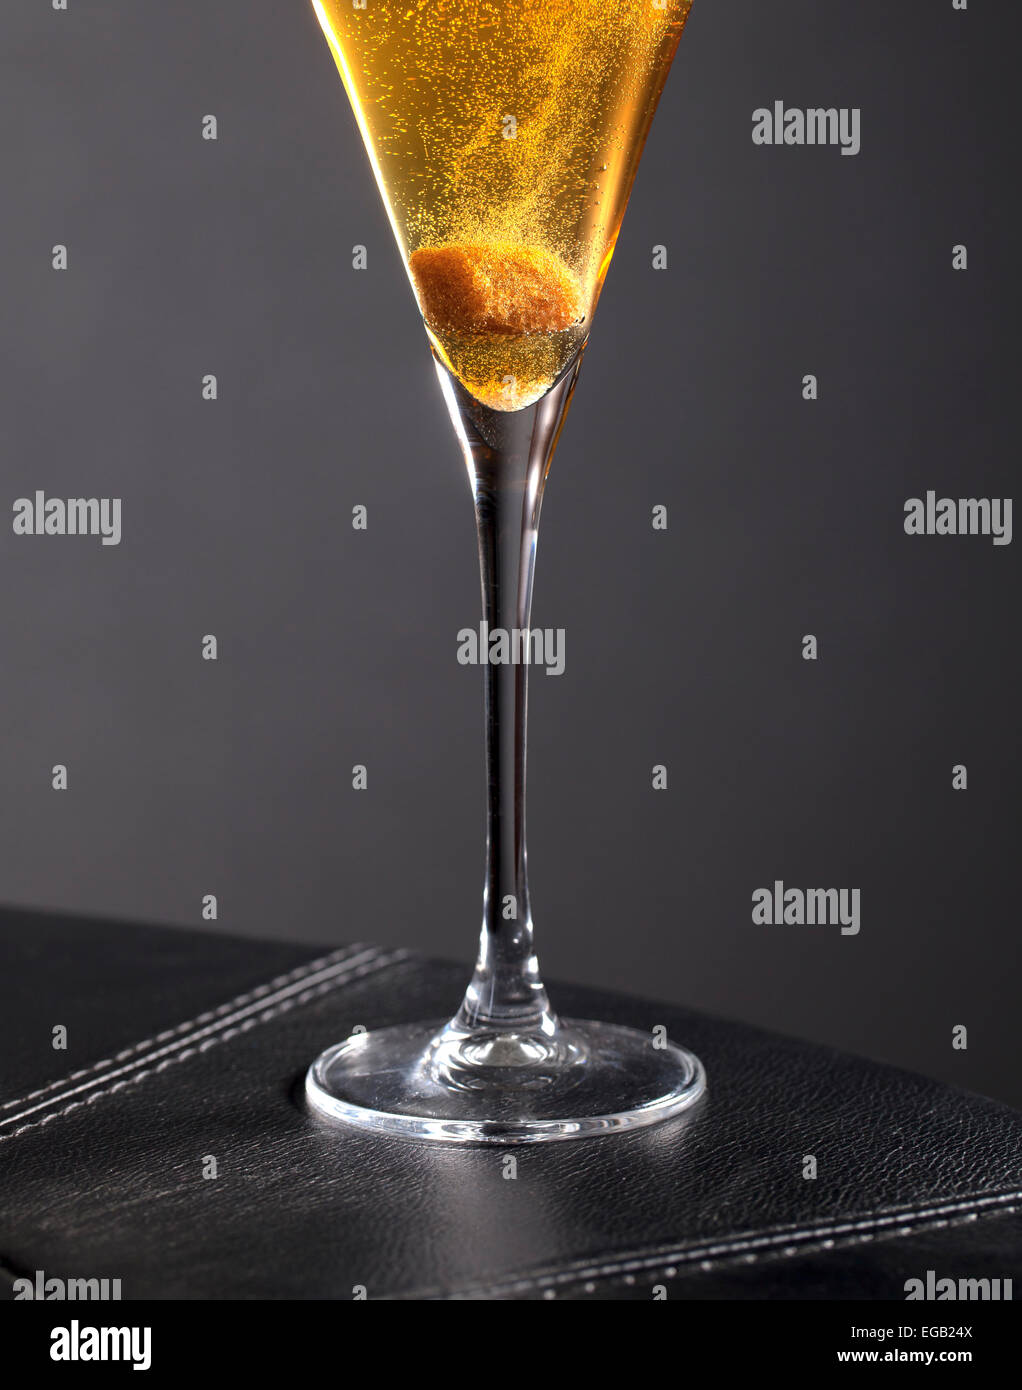 Sugar Dissolving in the Bottom of Champagne Glass Stock Photo